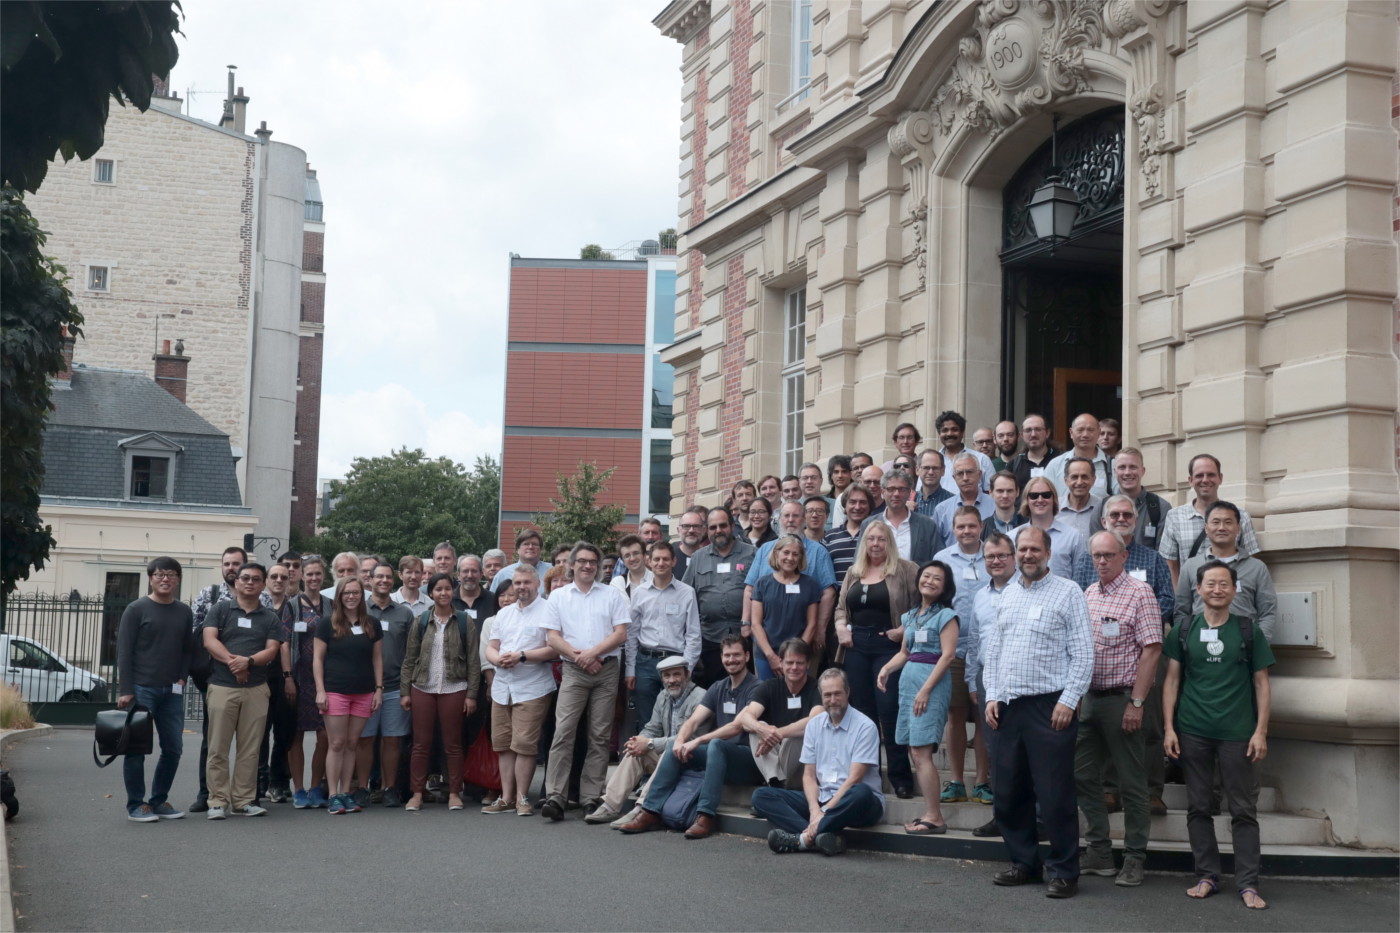 CHARMM-Tinker Joint Meeting, Institut Pasteur, Paris, France, Jul. 2019  (CHARMM and Tinker groups together)